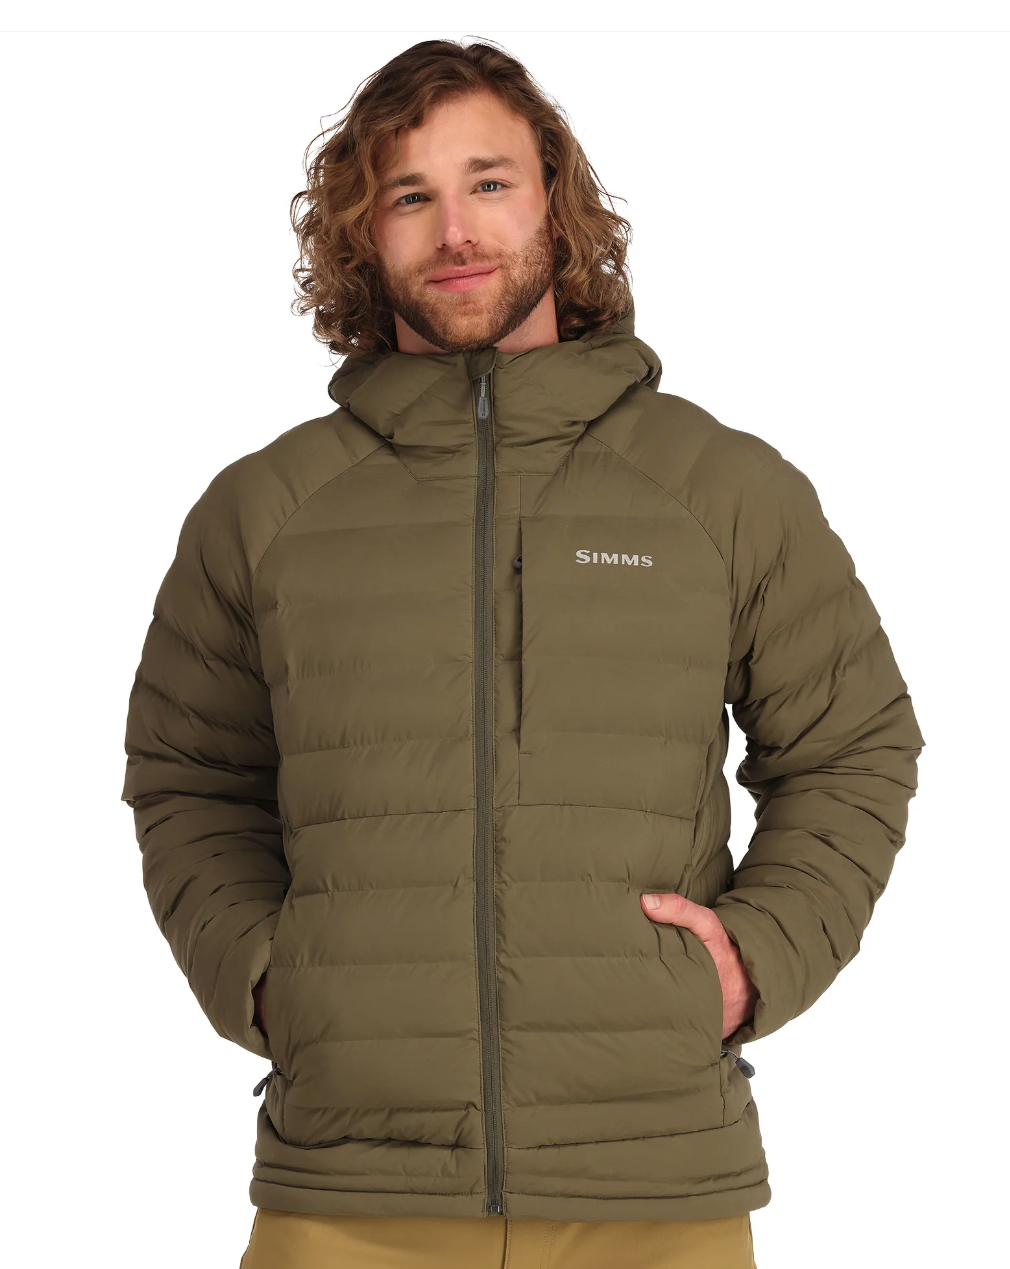 Simms ExStream Insulated Hoody | Buy Simms Fishing Insulated Jackets ...